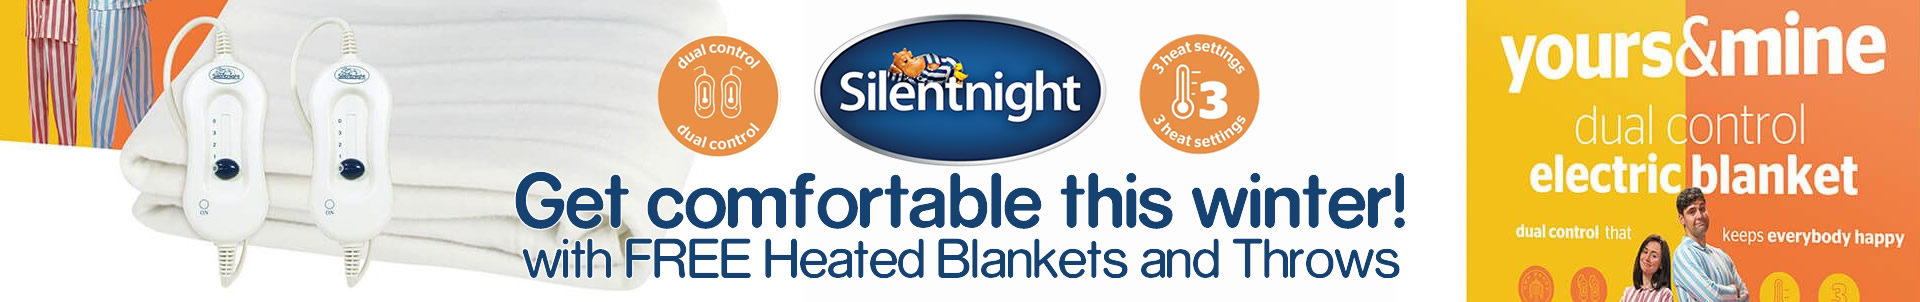 Silentnight Free Heated Blankets and Throws